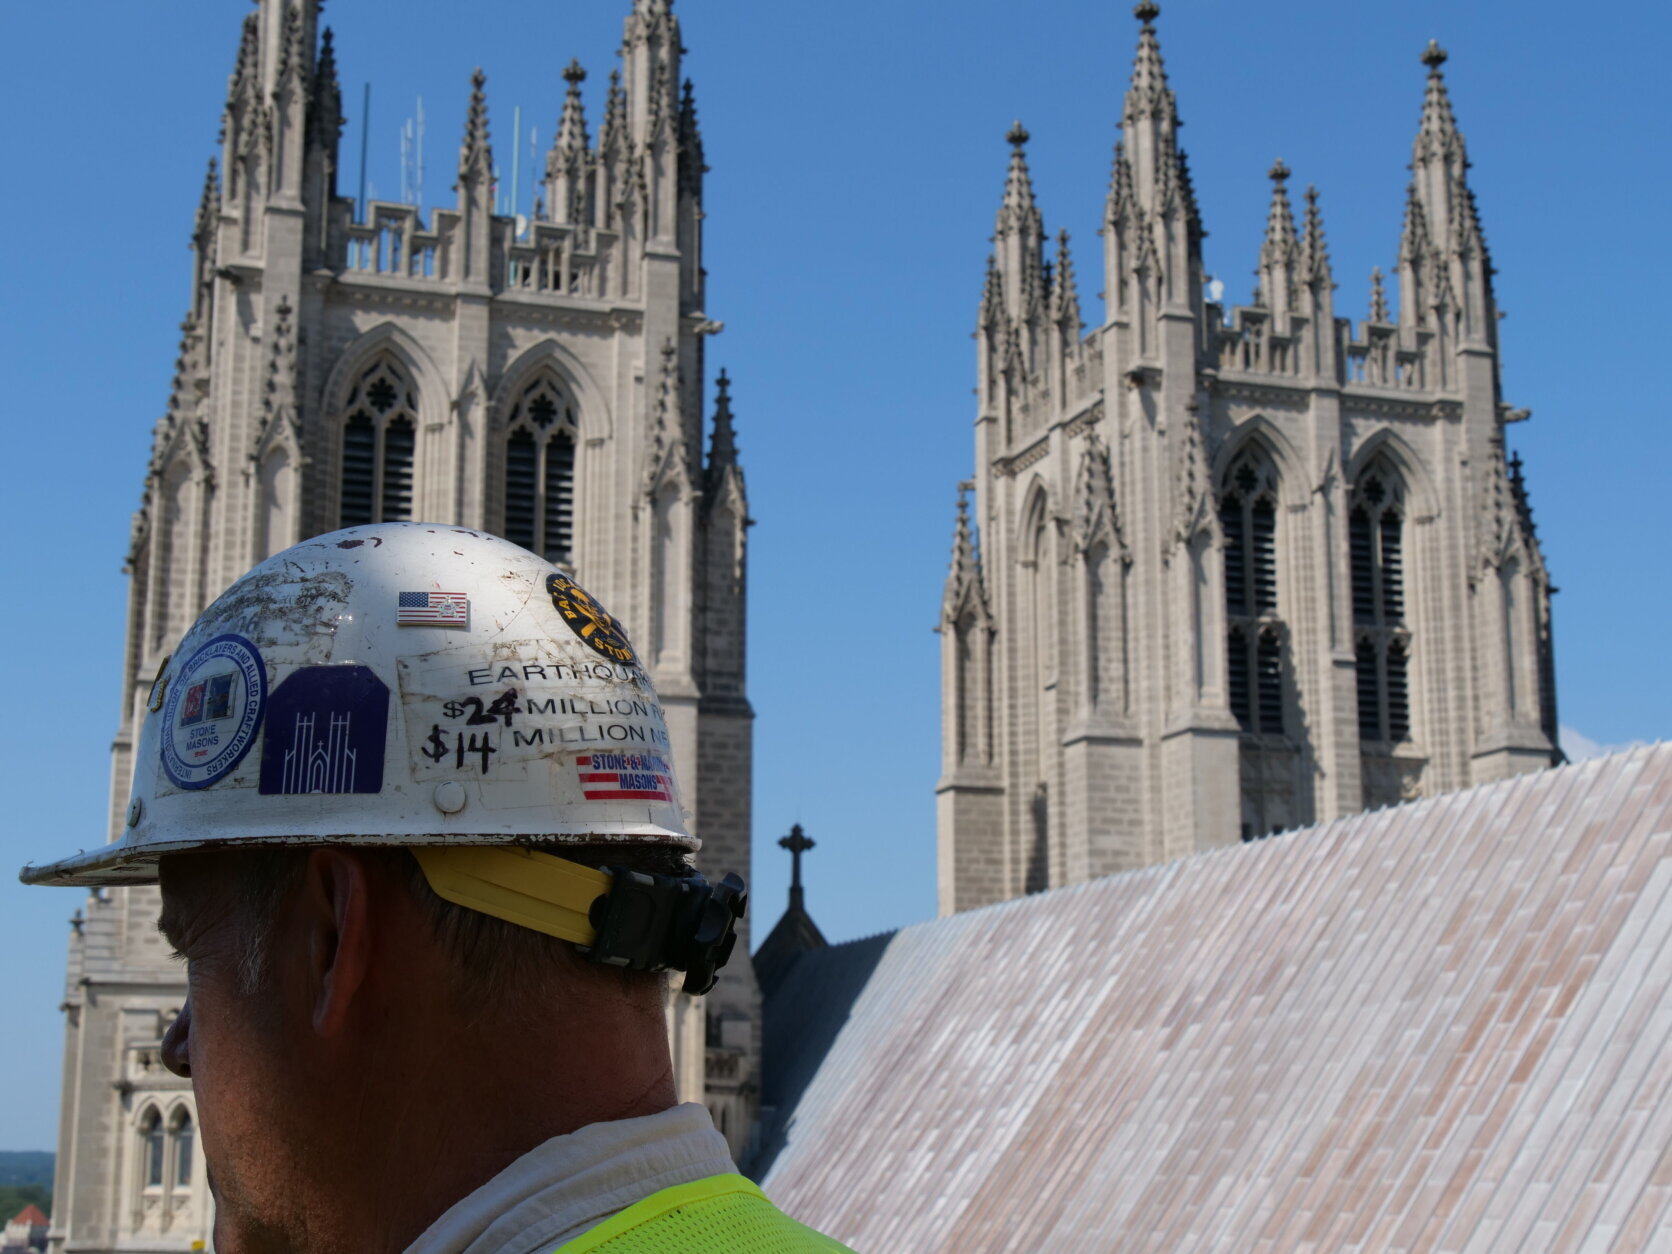 Re-capitation': National Cathedral's gargoyle gets its head back